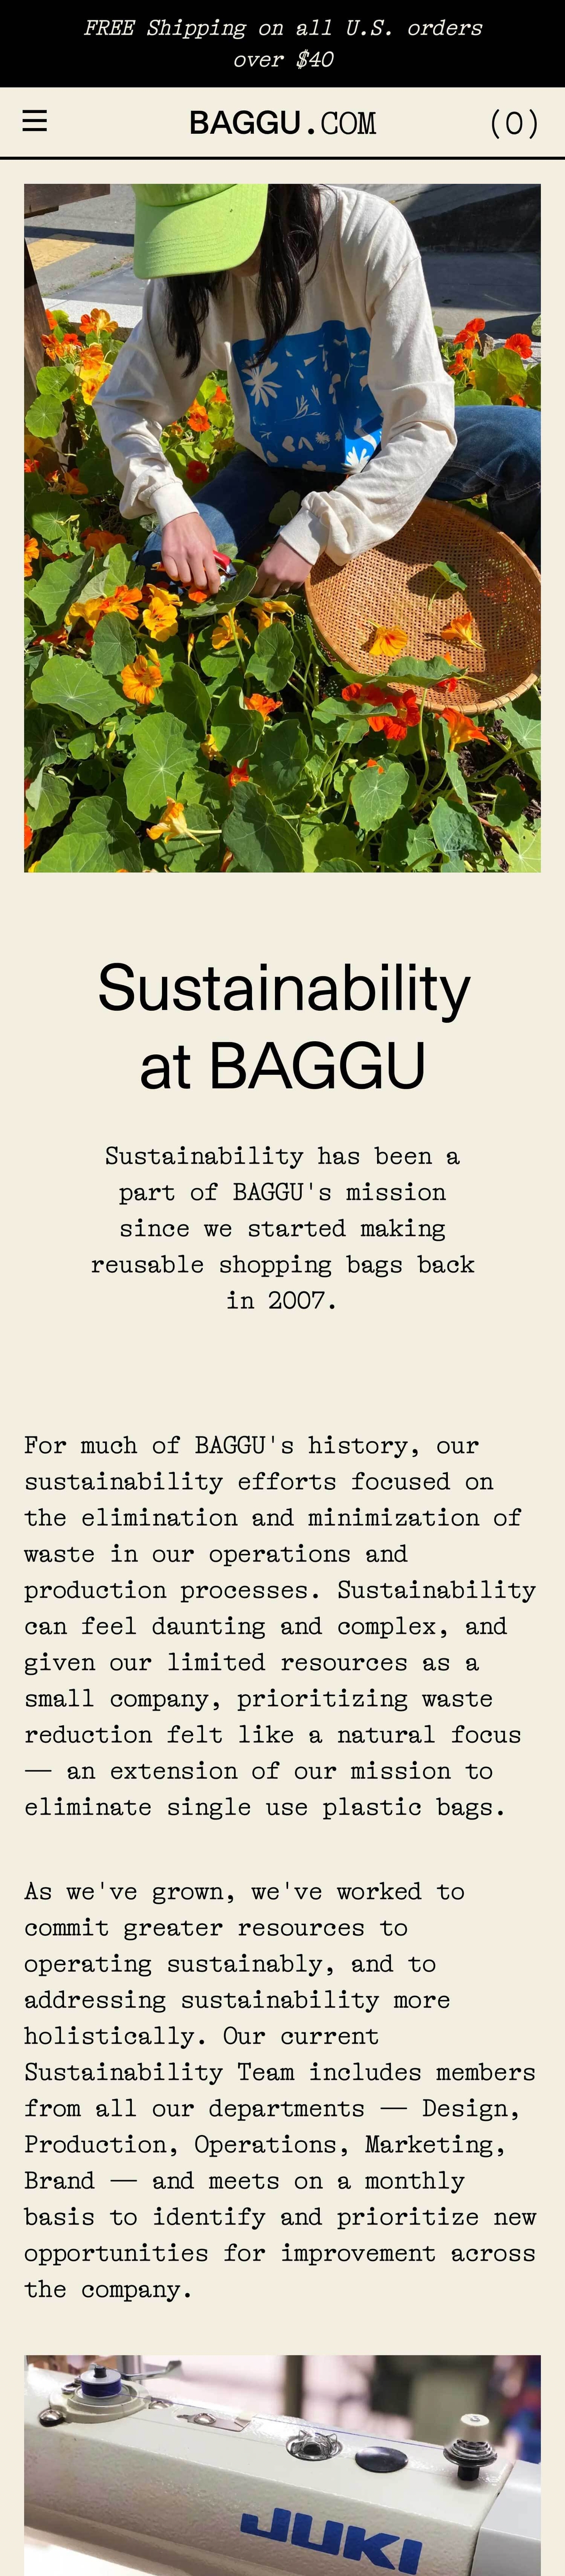 Baggu sustainability page mobile layout preview